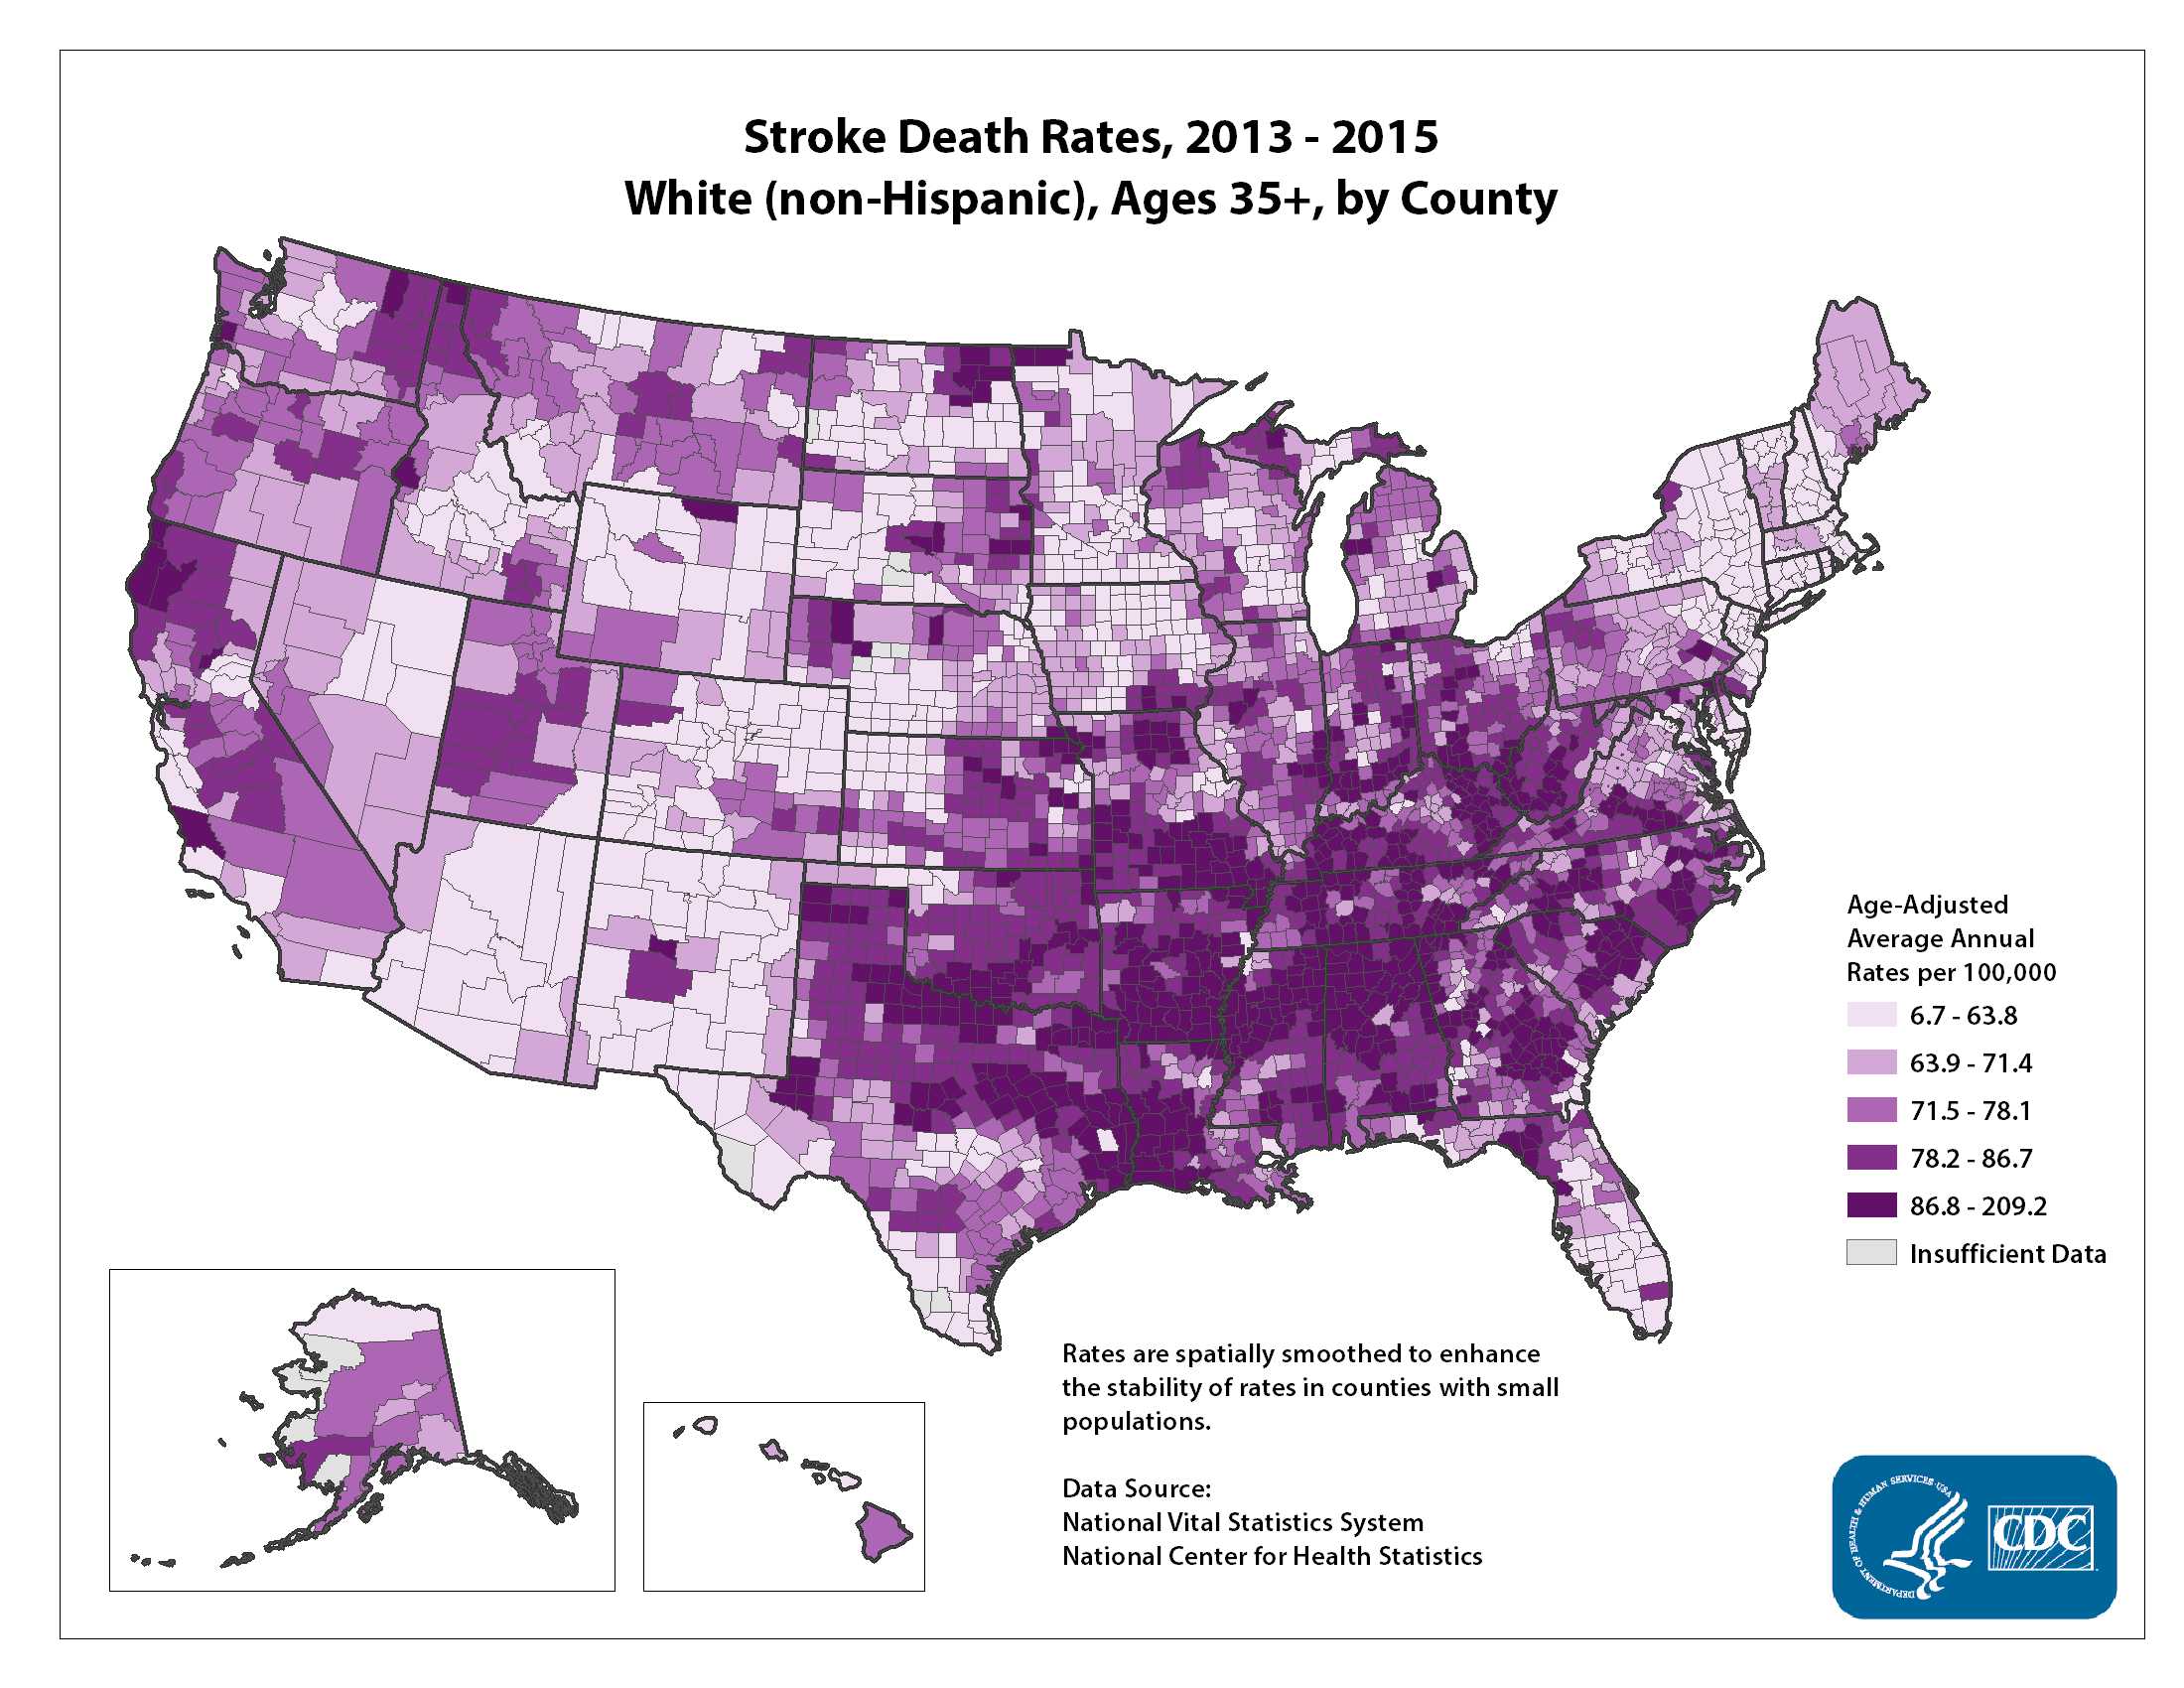 Stroke Death Rates for 2012 through 2014 for Whites Aged 35 Years and Older by County. The map shows that concentrations of counties with the highest stroke death rates - meaning the top quintile - are located primarily in the Southeast, with heavy concentrations of high-rate counties in Arkansas, West Virginia, Kentucky, and parts of Texas. Pockets of high-rate counties also are found in Oklahoma, Illinois, Missouri, Indiana, South Dakota, North Carolina, South Carolina, and Georgia.